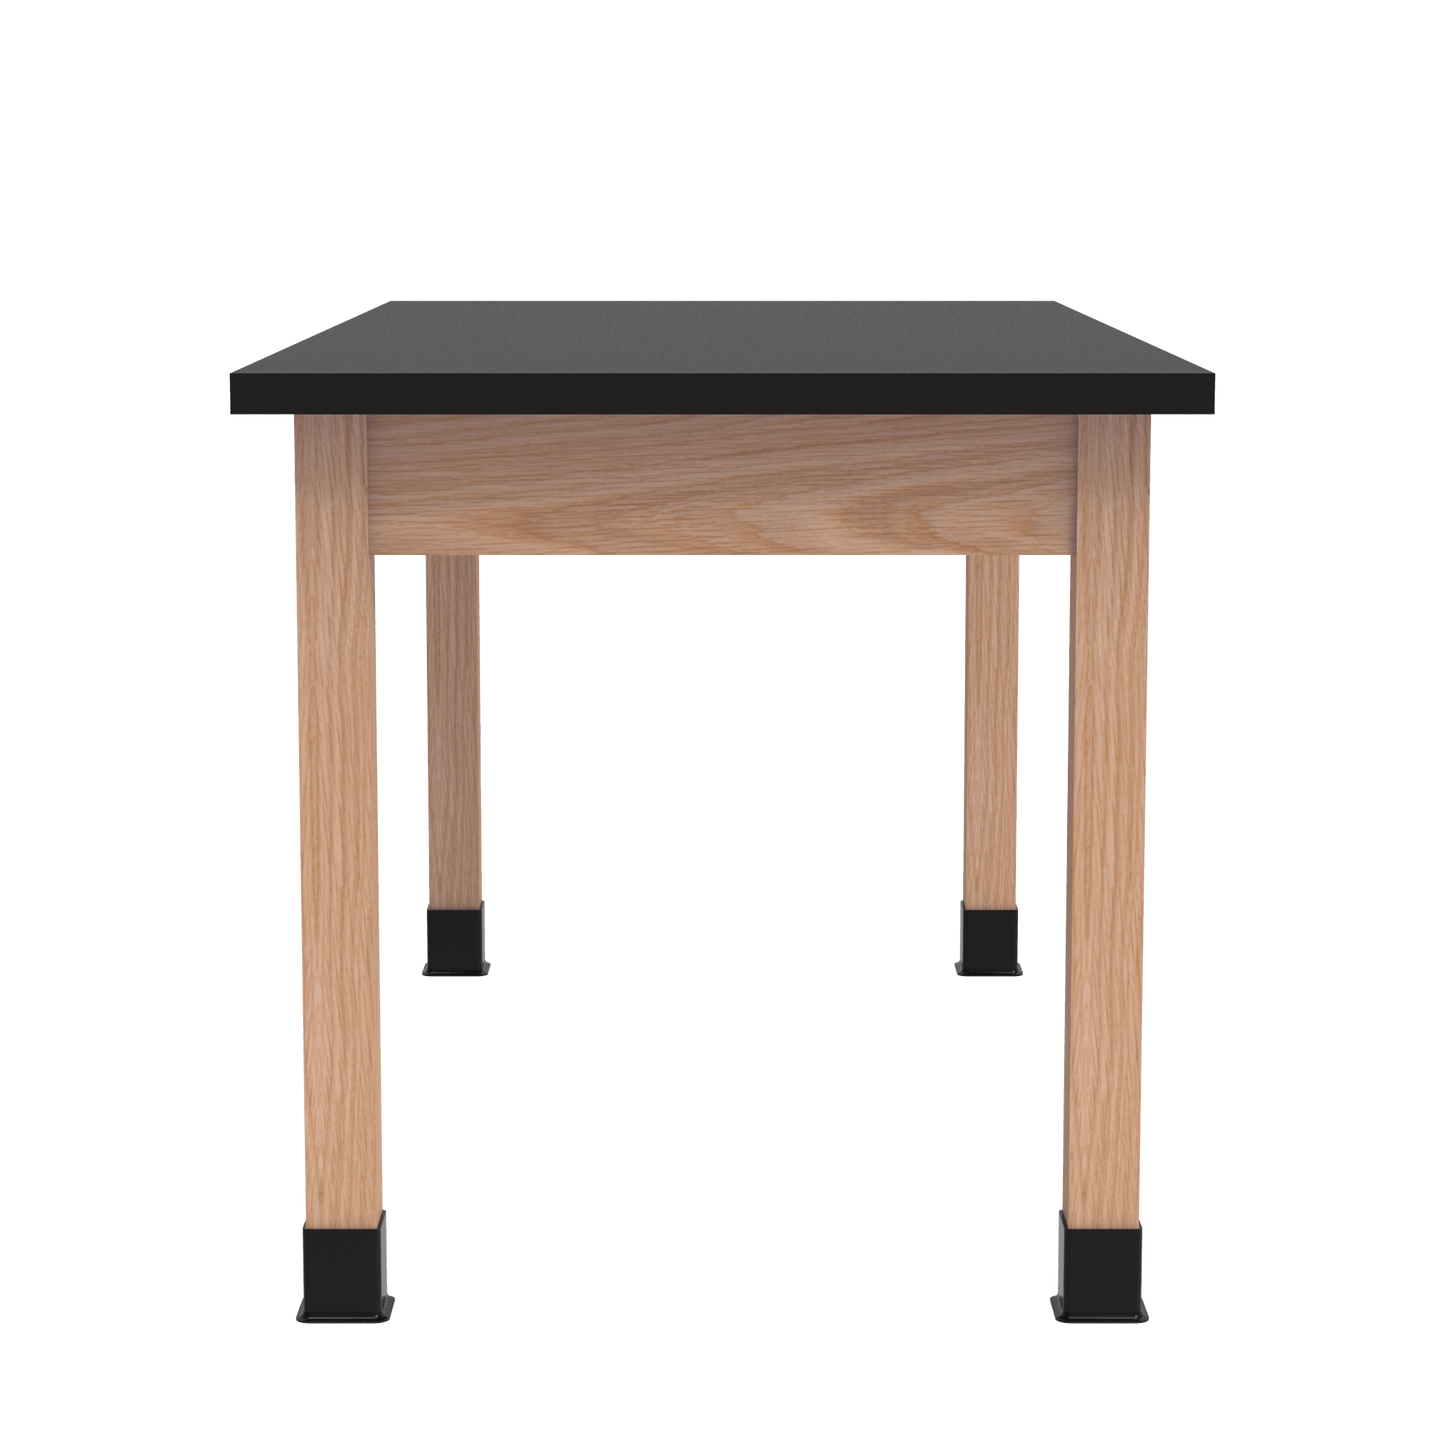 Diversified Woodcrafts Science Table w/ Book Compartment - 60" W x 24" D - Solid Oak Frame and Adjustable Glides - SchoolOutlet